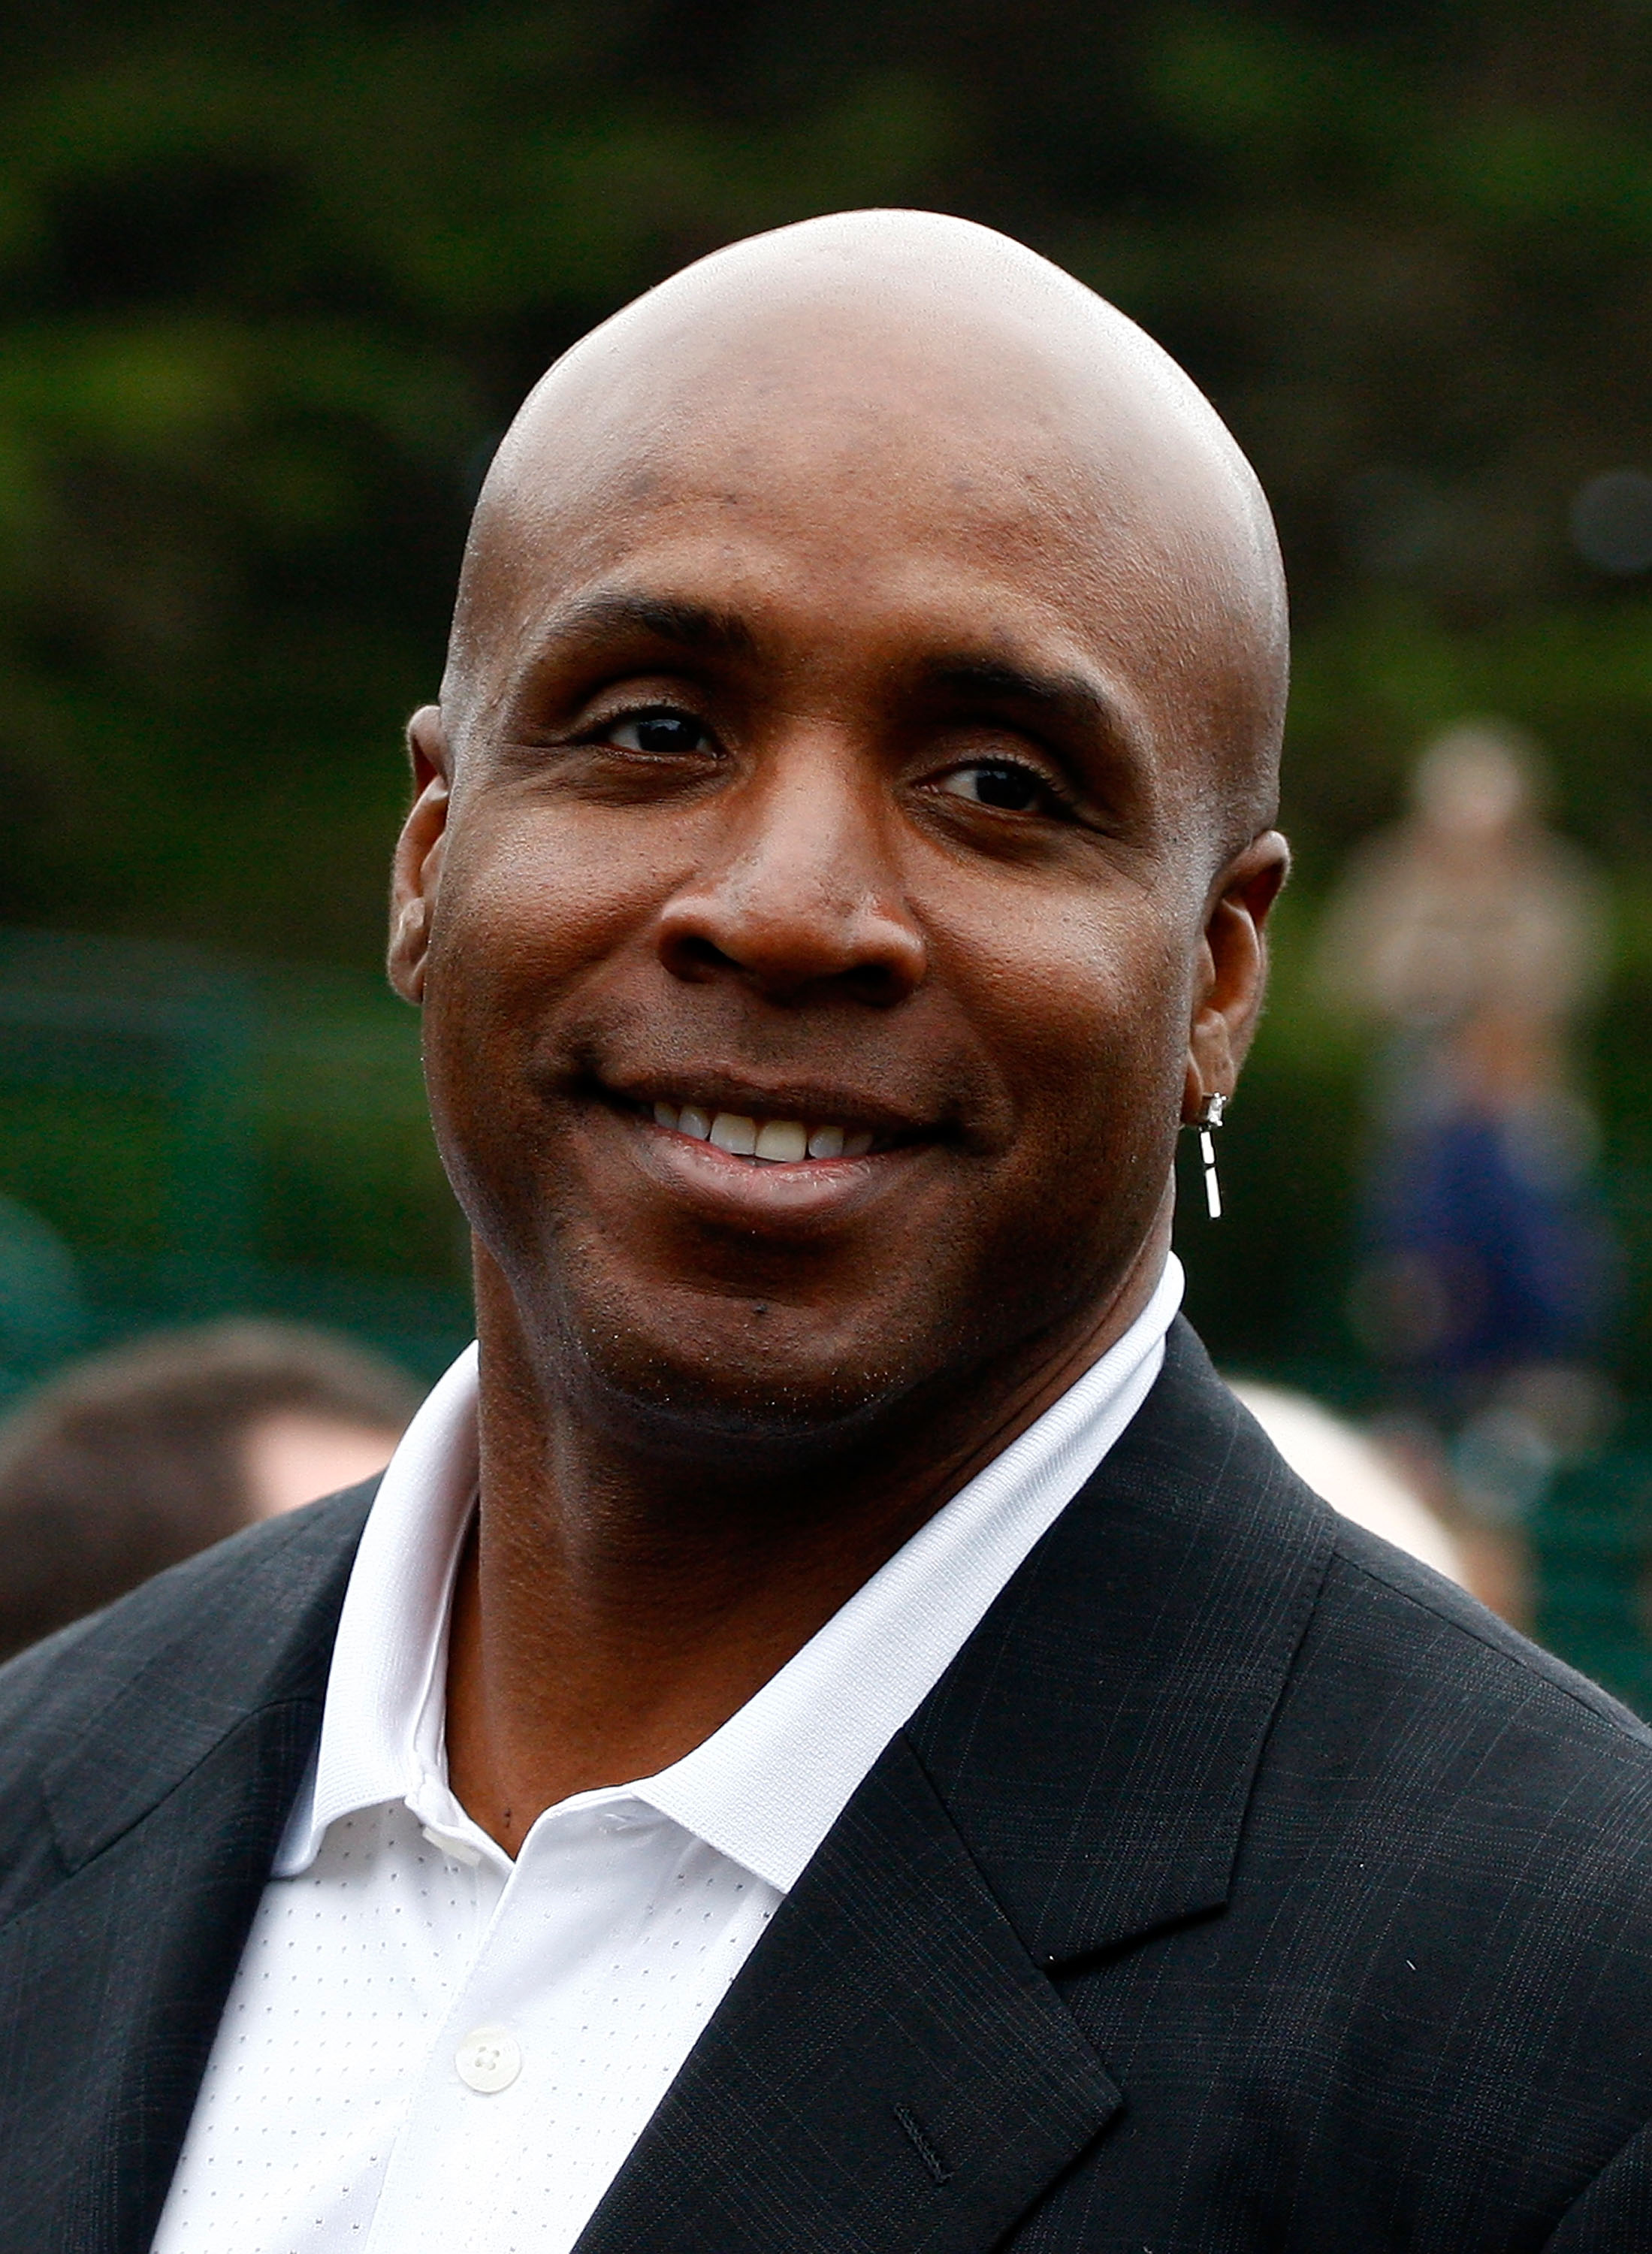 SAN FRANCISCO - OCTOBER 07:  Baseball star Barry Bonds is seen during the Opening Cermonies prior to the start of The Presidents Cup at Harding Park Golf Course on October 7, 2009 in San Francisco, California.  (Photo by Scott Halleran/Getty Images)